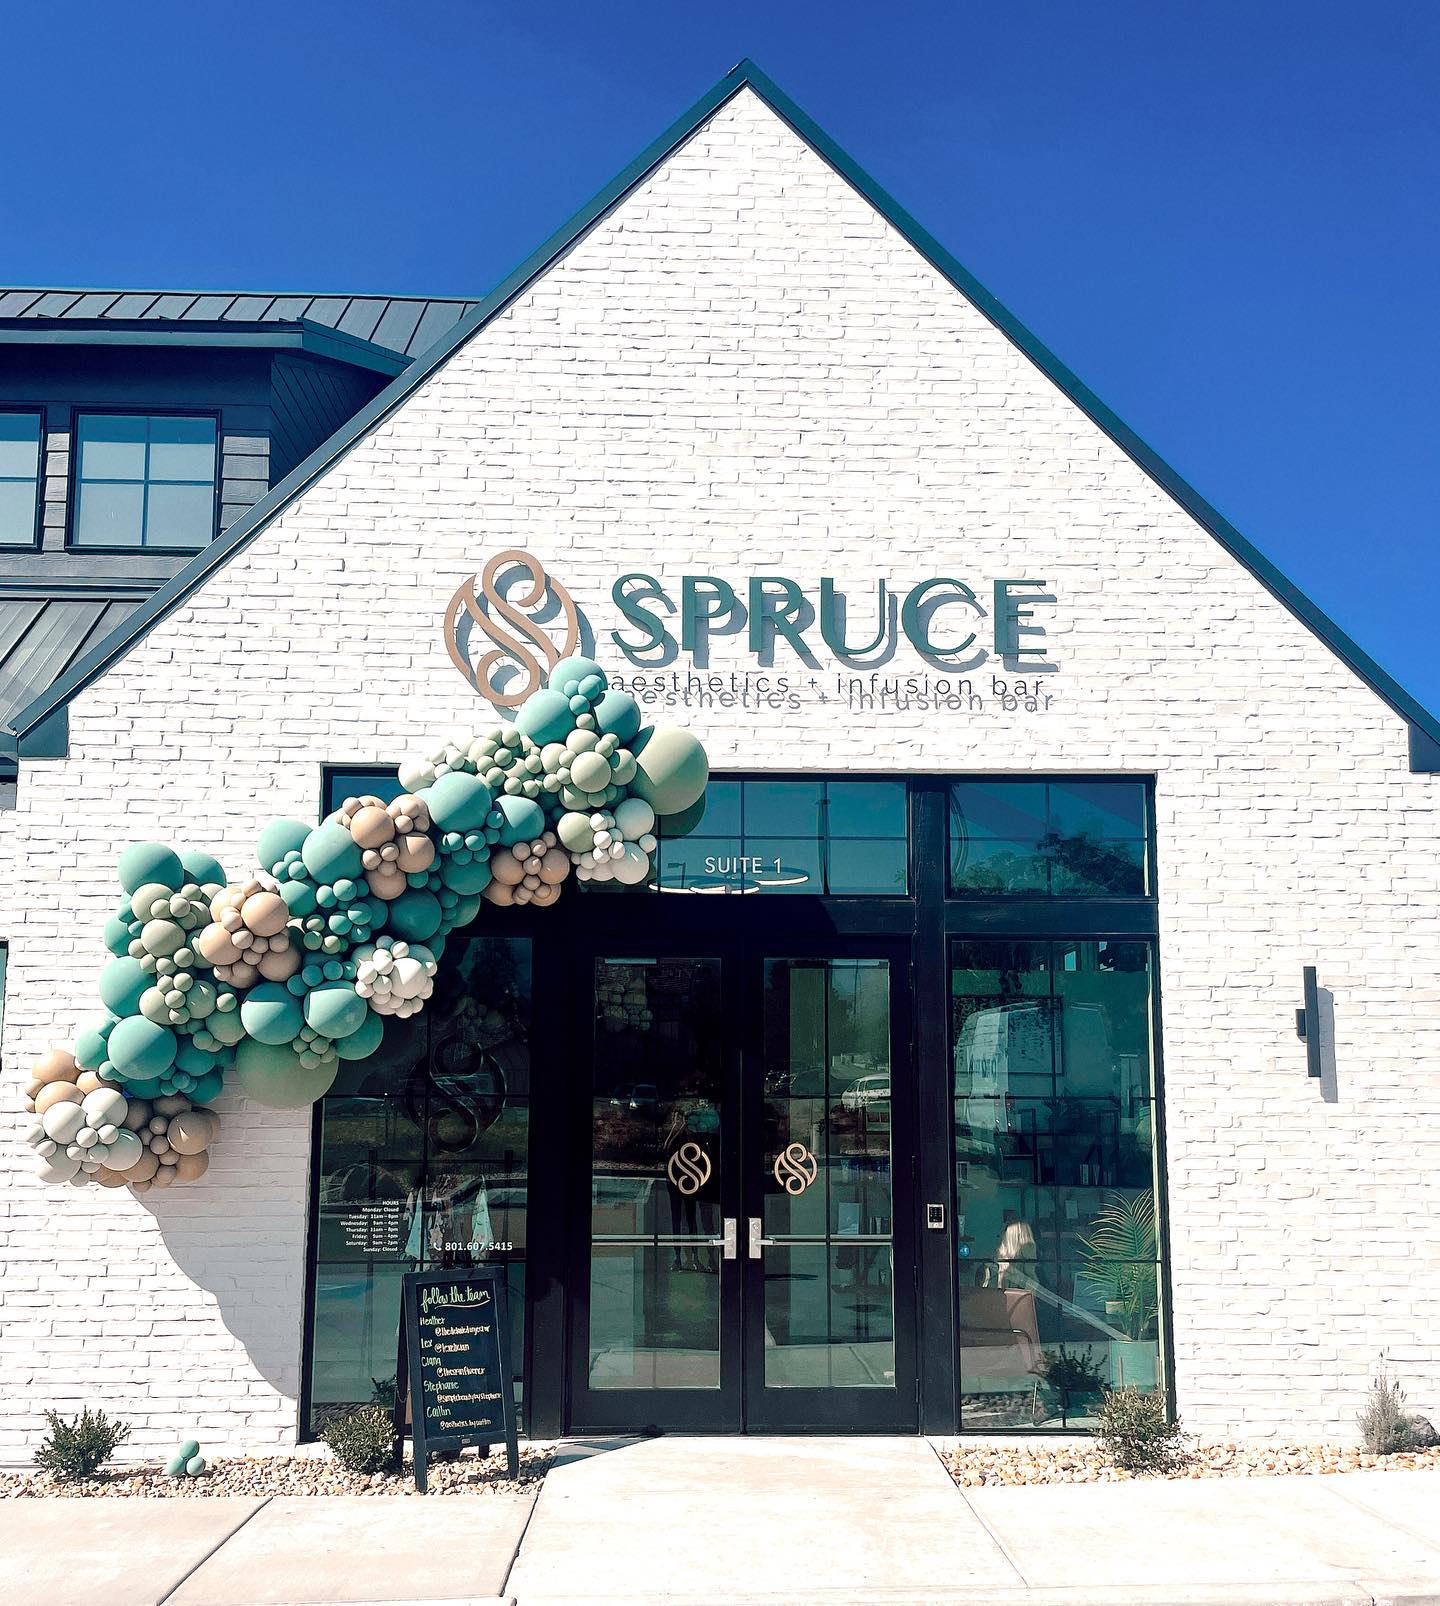 The exterior of Spruce Aesthetics + Infusion Bar